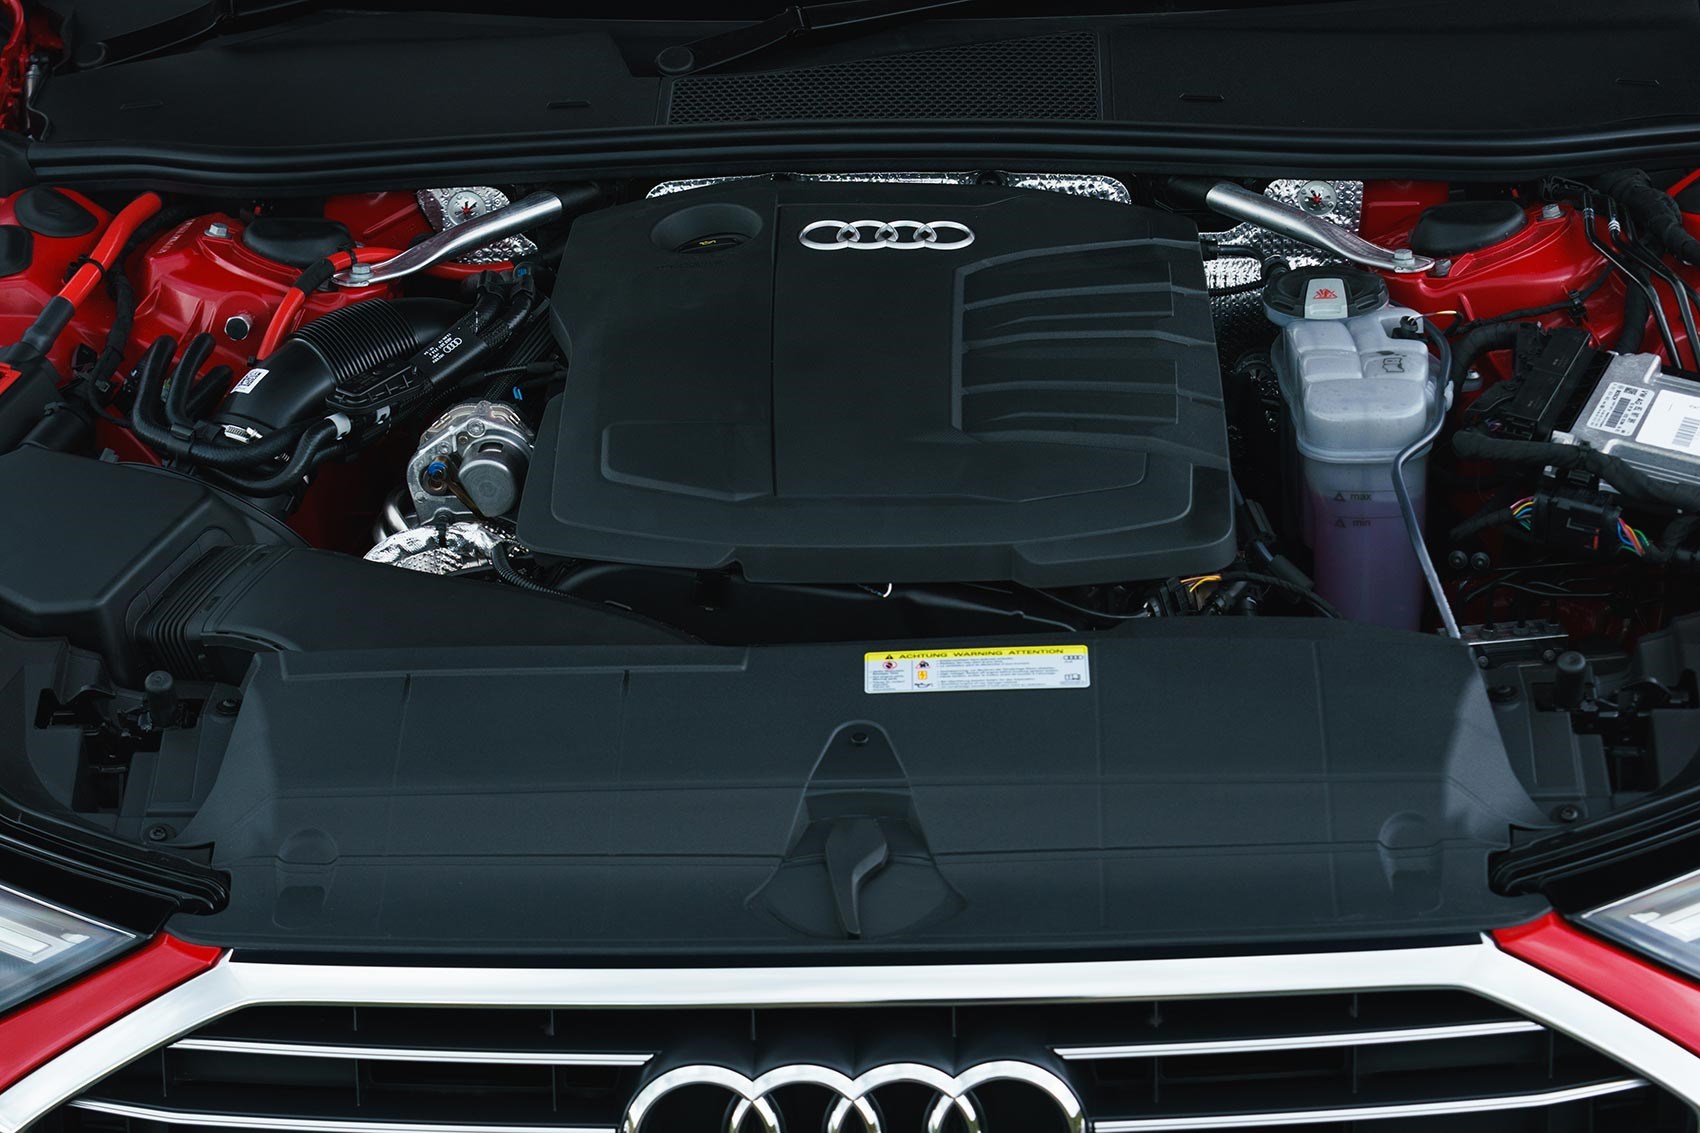 Diesel engines will predominate in the new Audi A6 for the time being